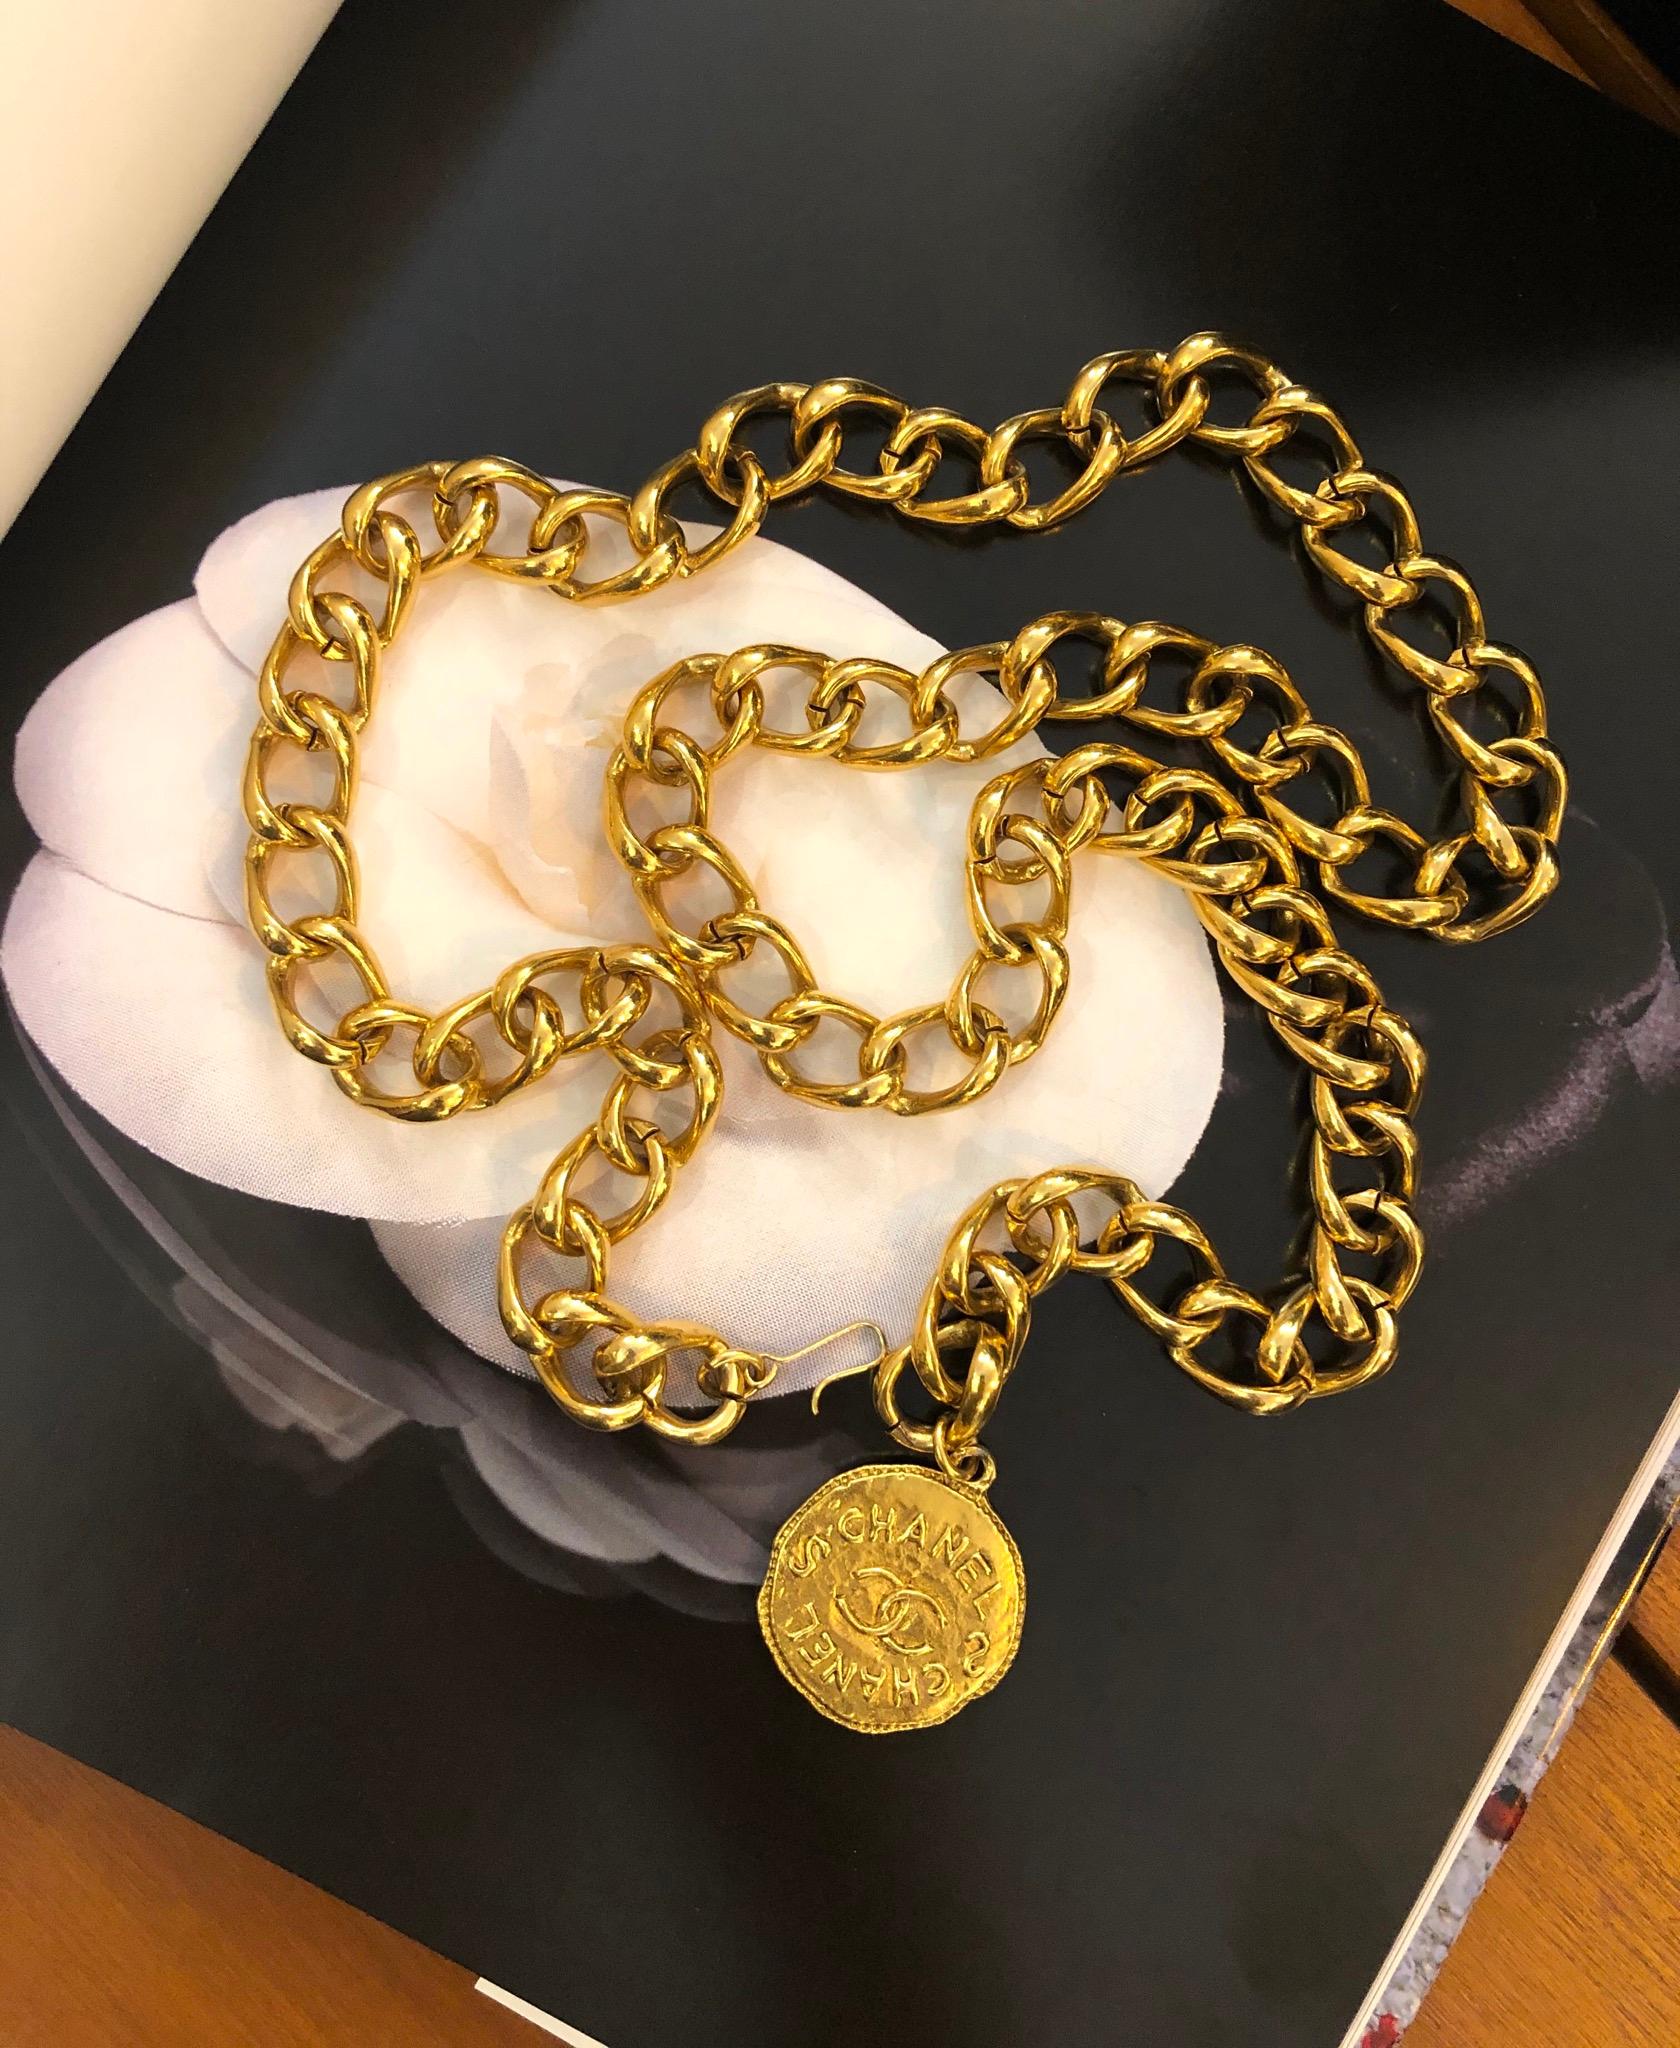 1990s Chanel gold toned chain belt featuring a gold toned Byzantine styled coin. It can be worn as a belt or a wrap around necklace. Stamped 98P made in France. Adjustable hook fastening. Length measures approximately 33” (84cm) Coin charm 1.25”